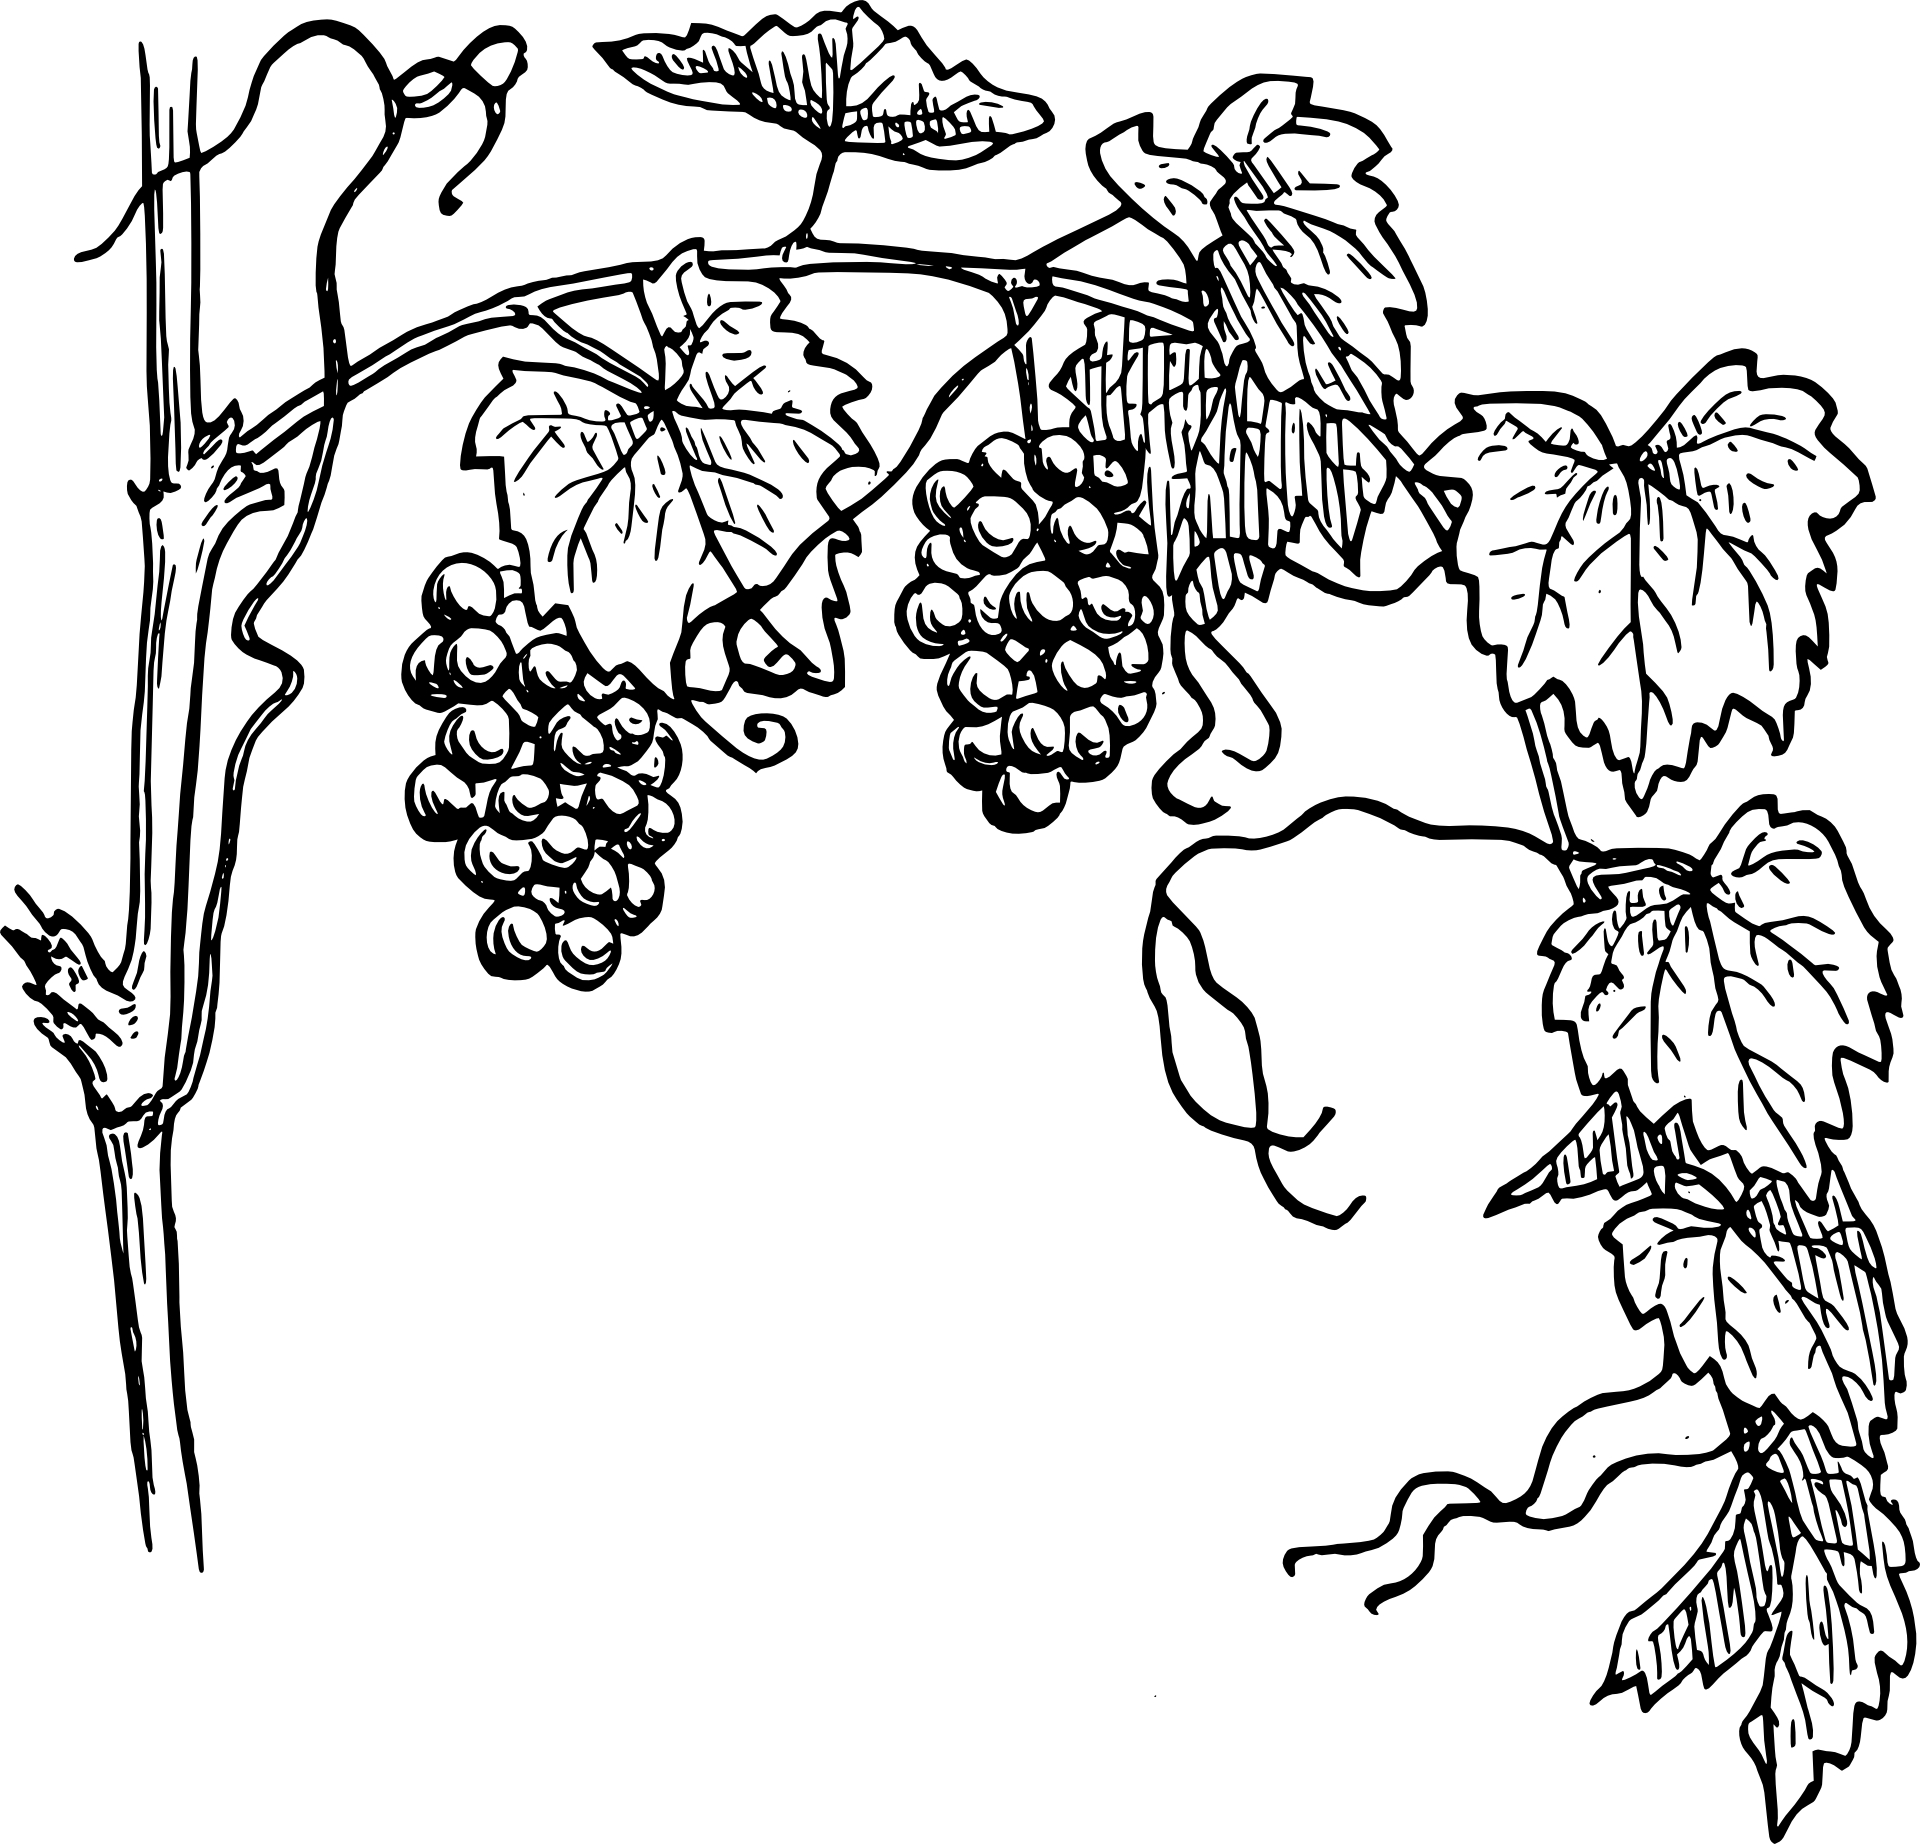 Grapes Sketch - ClipArt Best